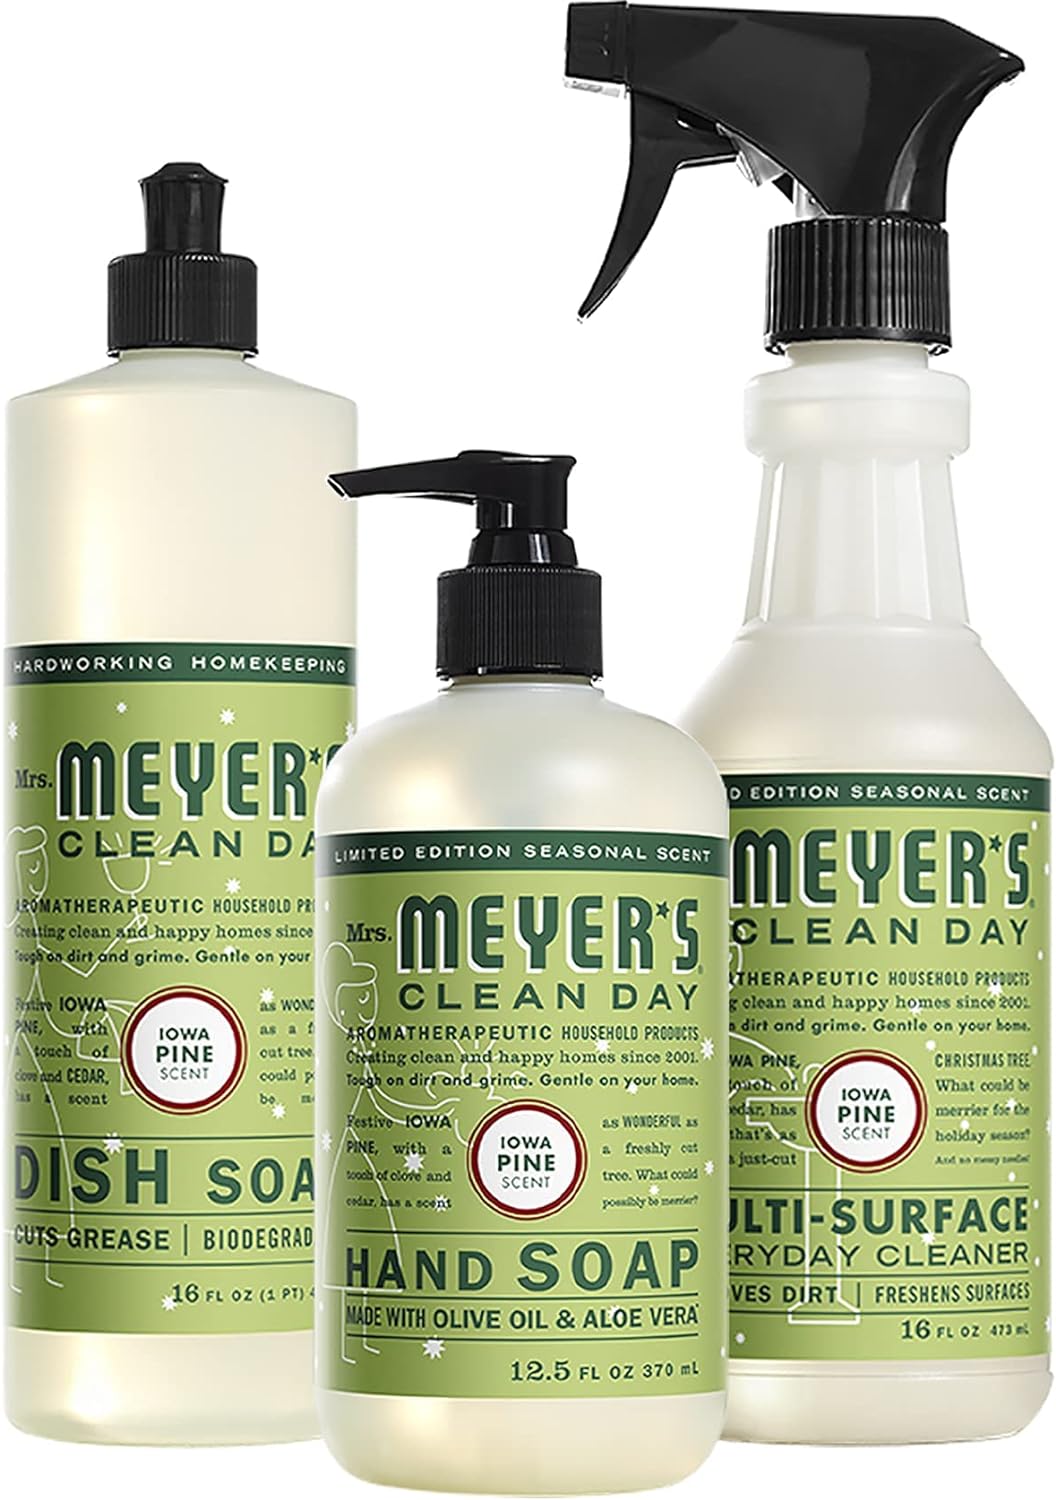 Mrs. Meyer's Kitchen Set, Dish Soap, Hand Soap, and Multi-Surface Cleaner, 3 CT (Iowa Pine)